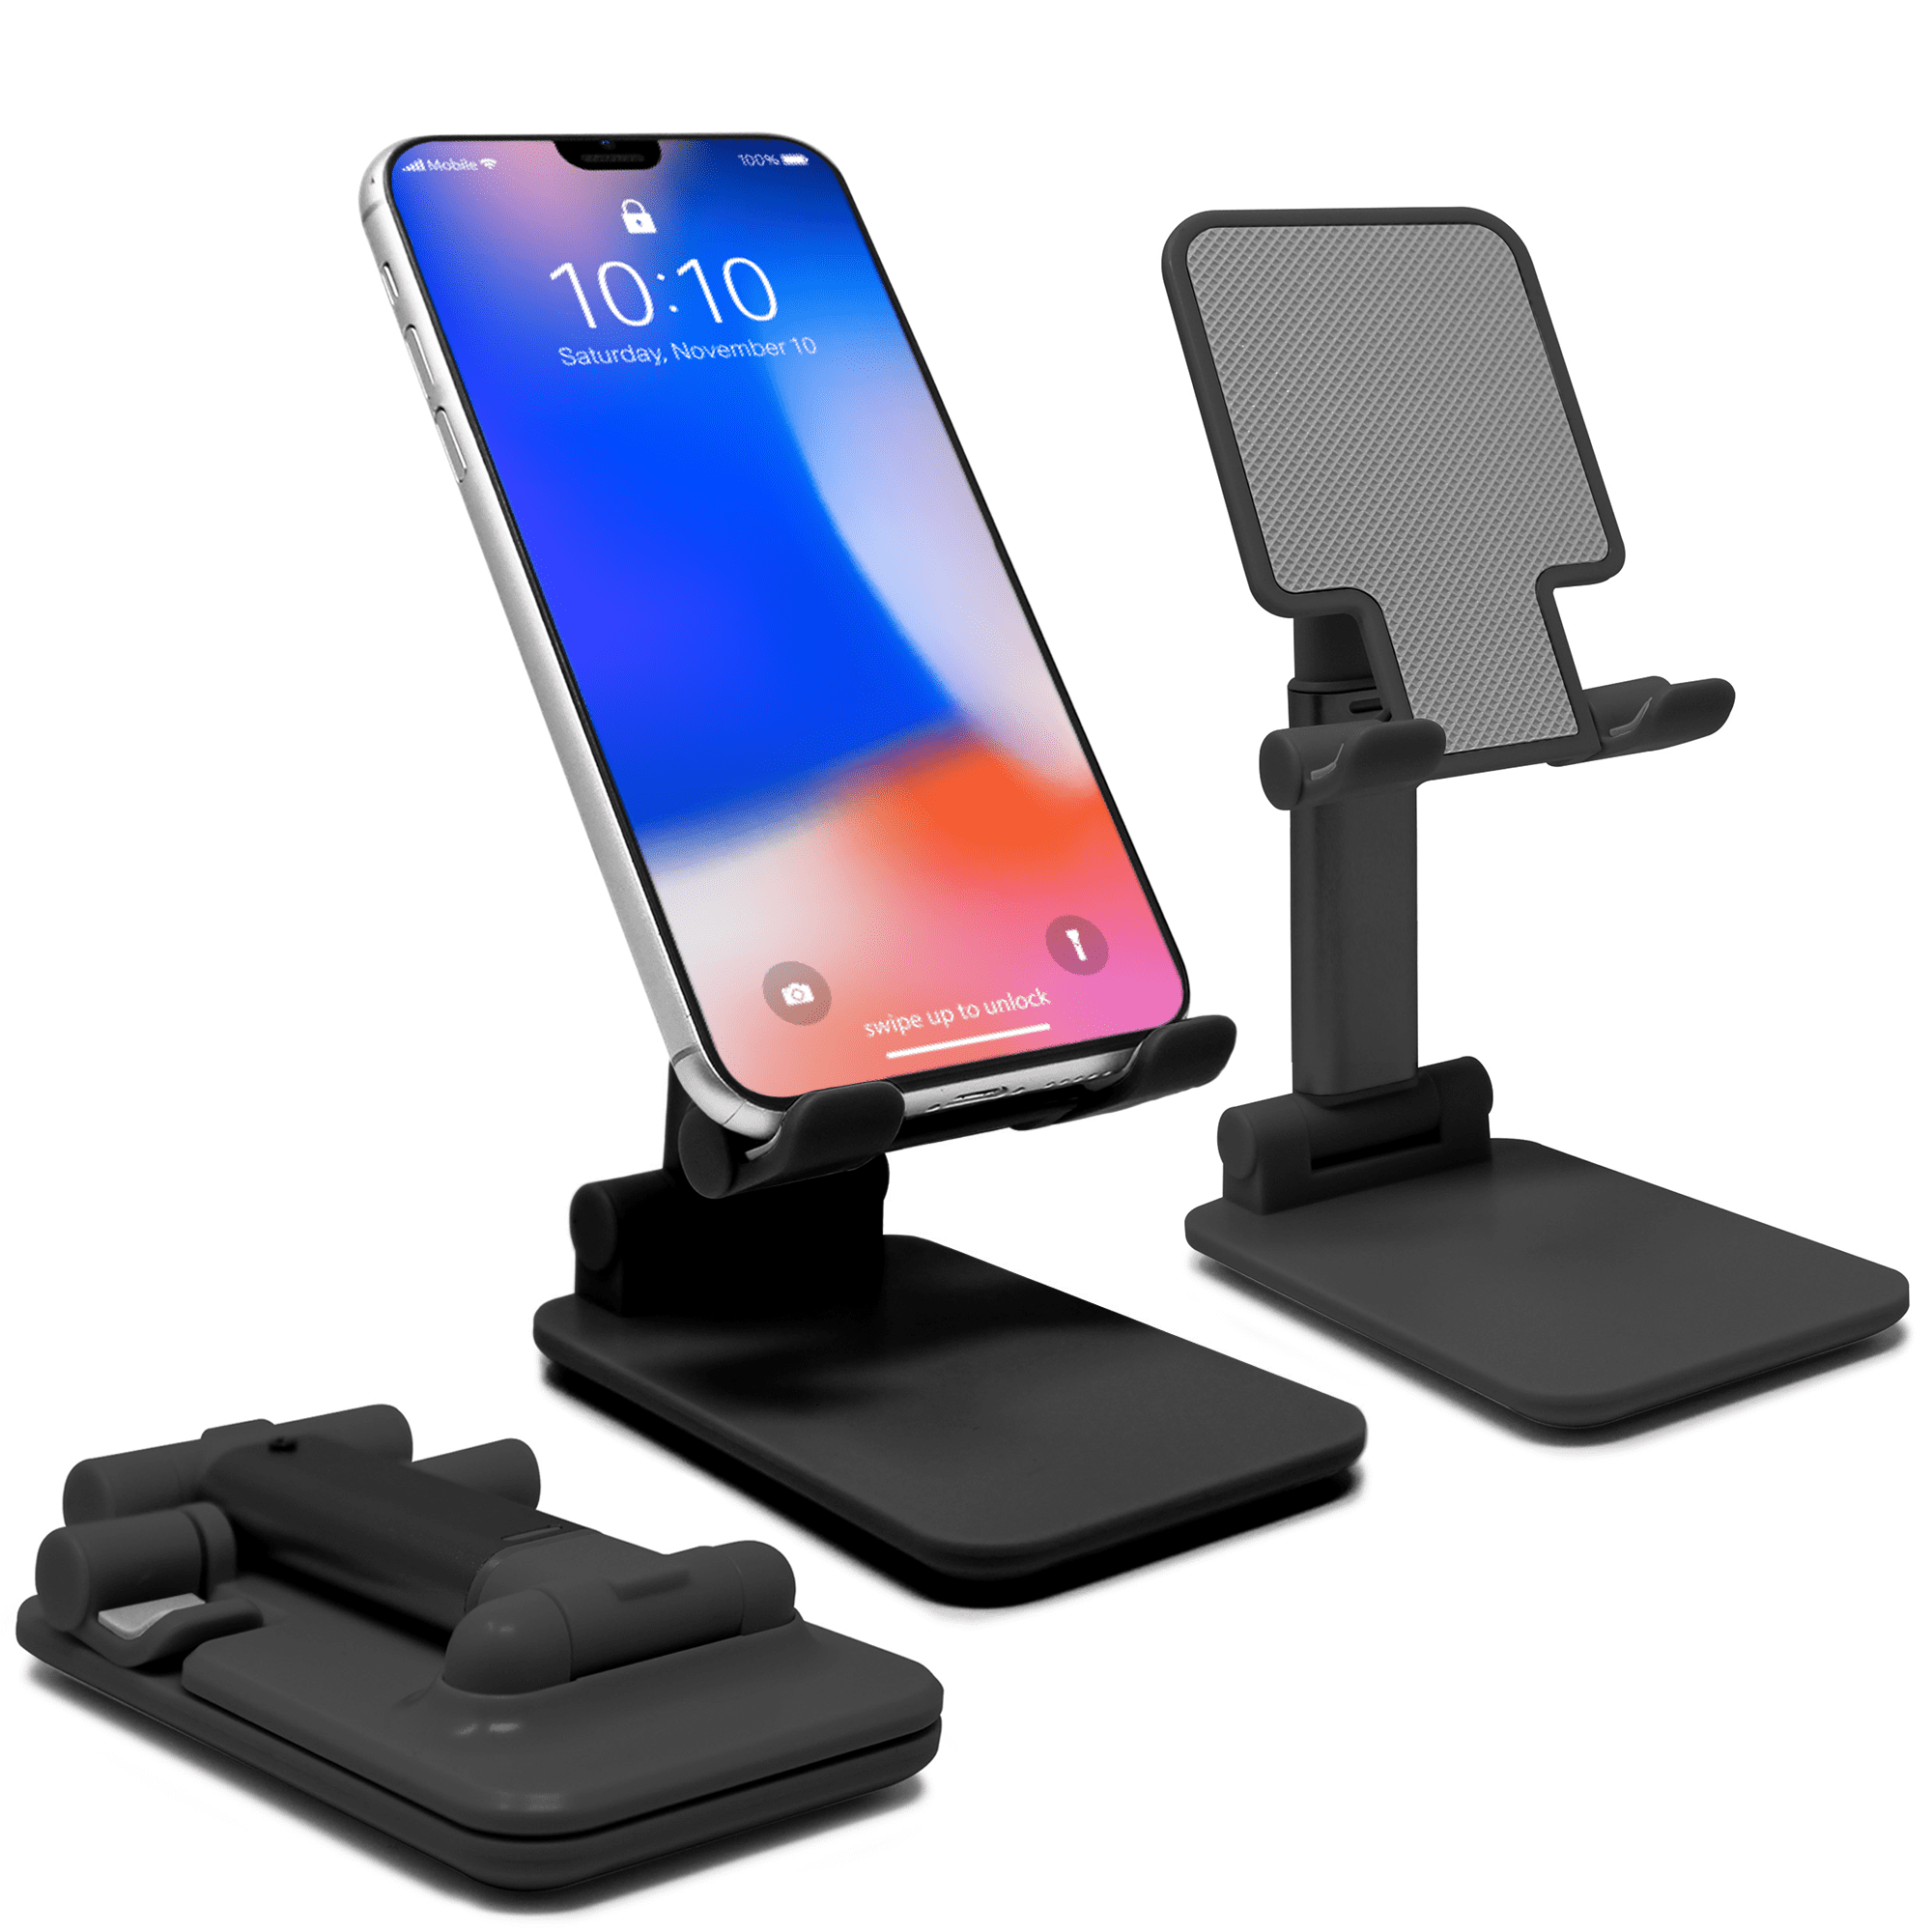 Compatible Phone XS/XR/8/8 Plus/7/7 Plus e-Reader Elimoons Phone Stand 2 Pack Multi-Angle Cell Phone Stand Tablet Stand Universal Smartphones for Holder Tablets 6-11 Galaxy S8/S7 Mini Black 